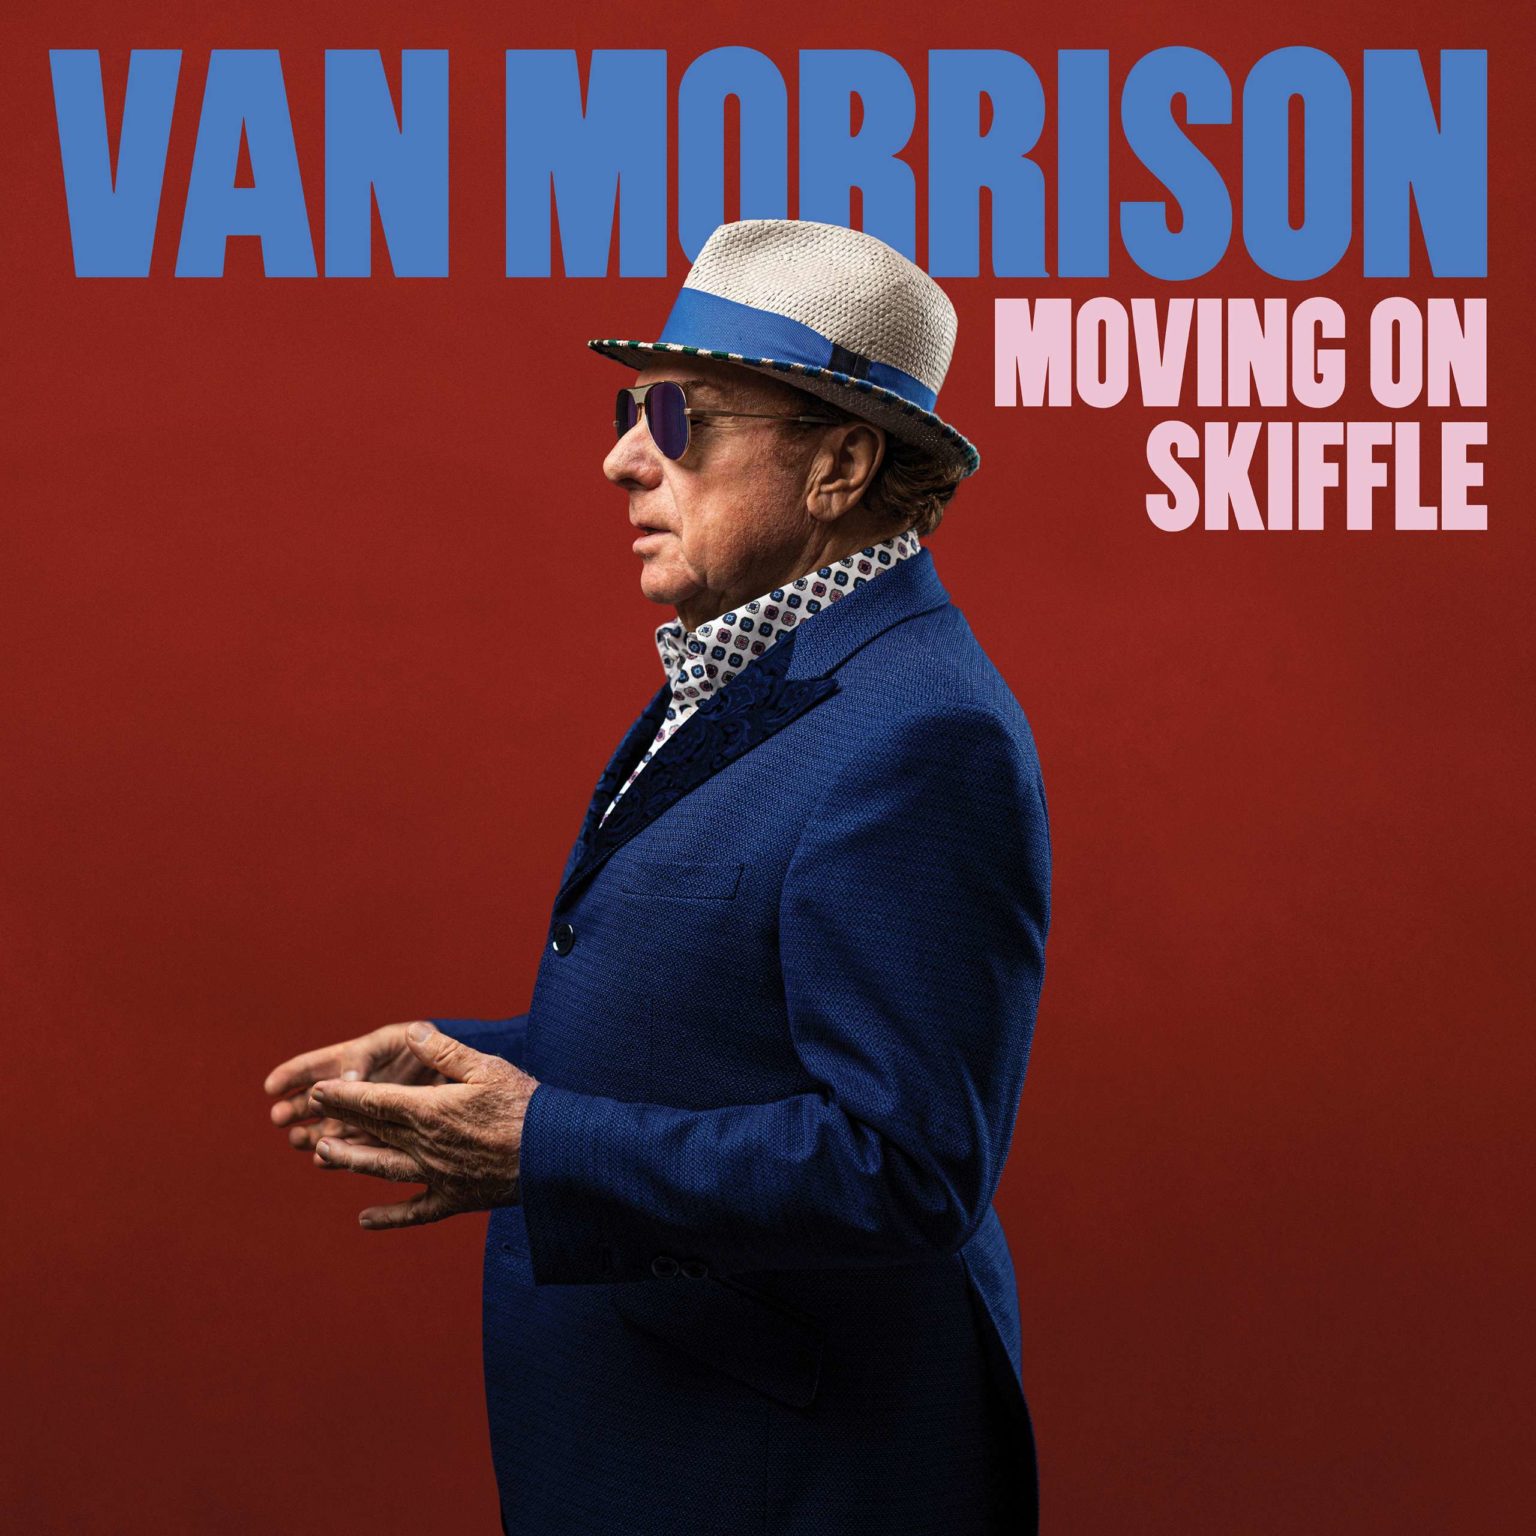 Van Morrison's New Album 'Moving On Skiffle' To Be Released On March 10